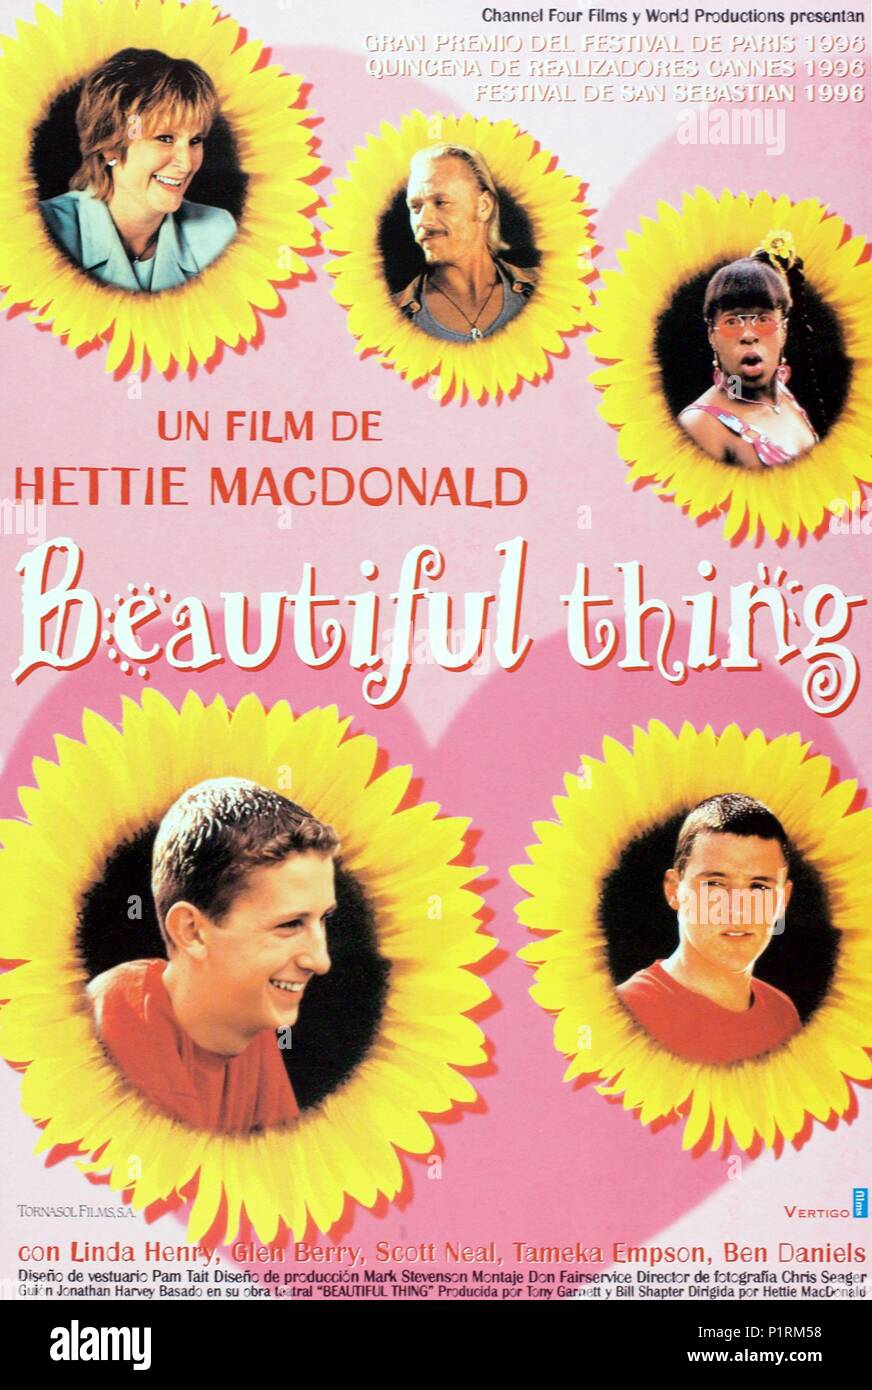 Original Film Title: BEAUTIFUL THING.  English Title: BEAUTIFUL THING.  Film Director: HETTIE MACDONALD.  Year: 1996. Credit: CHANNEL FOUR FILMS / Album Stock Photo